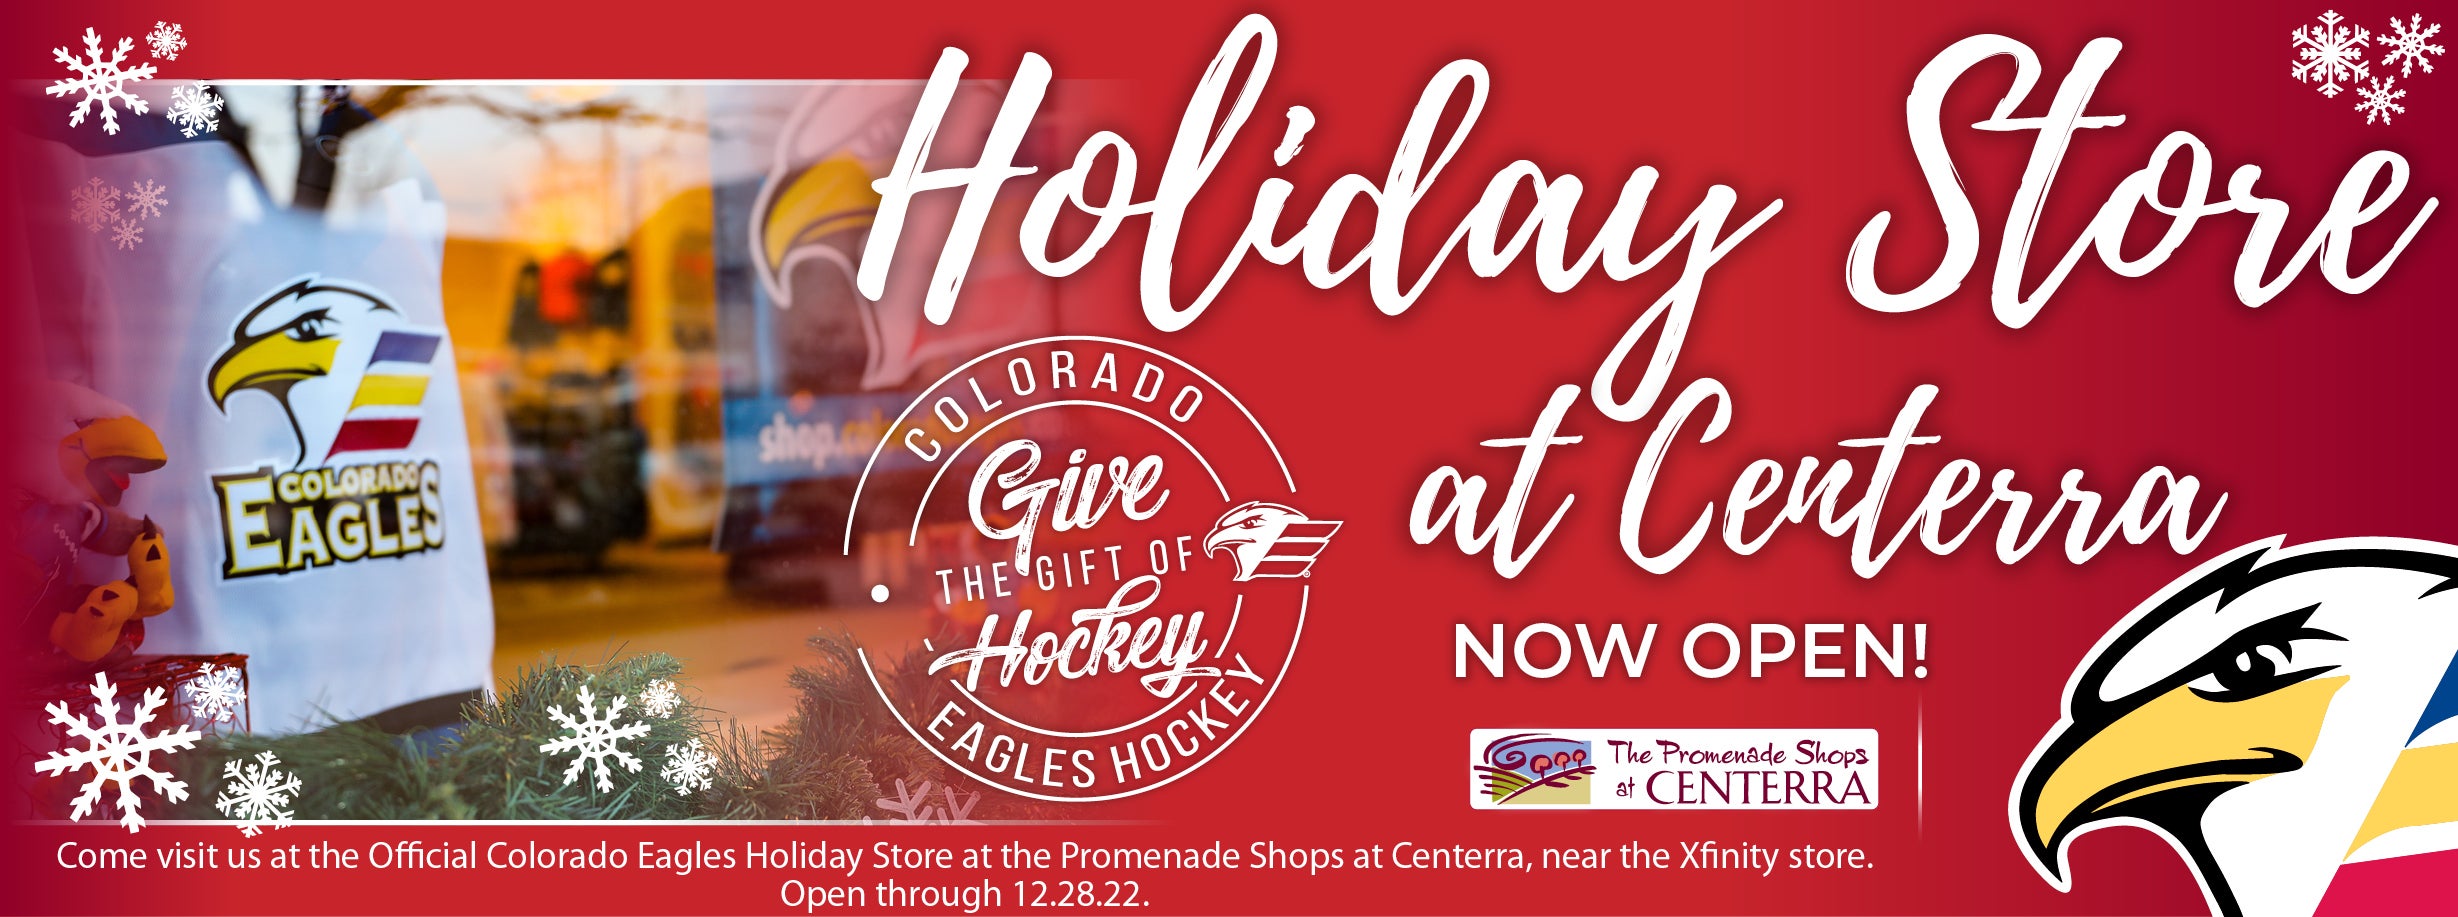 Holiday Store at Centerra Now Open!